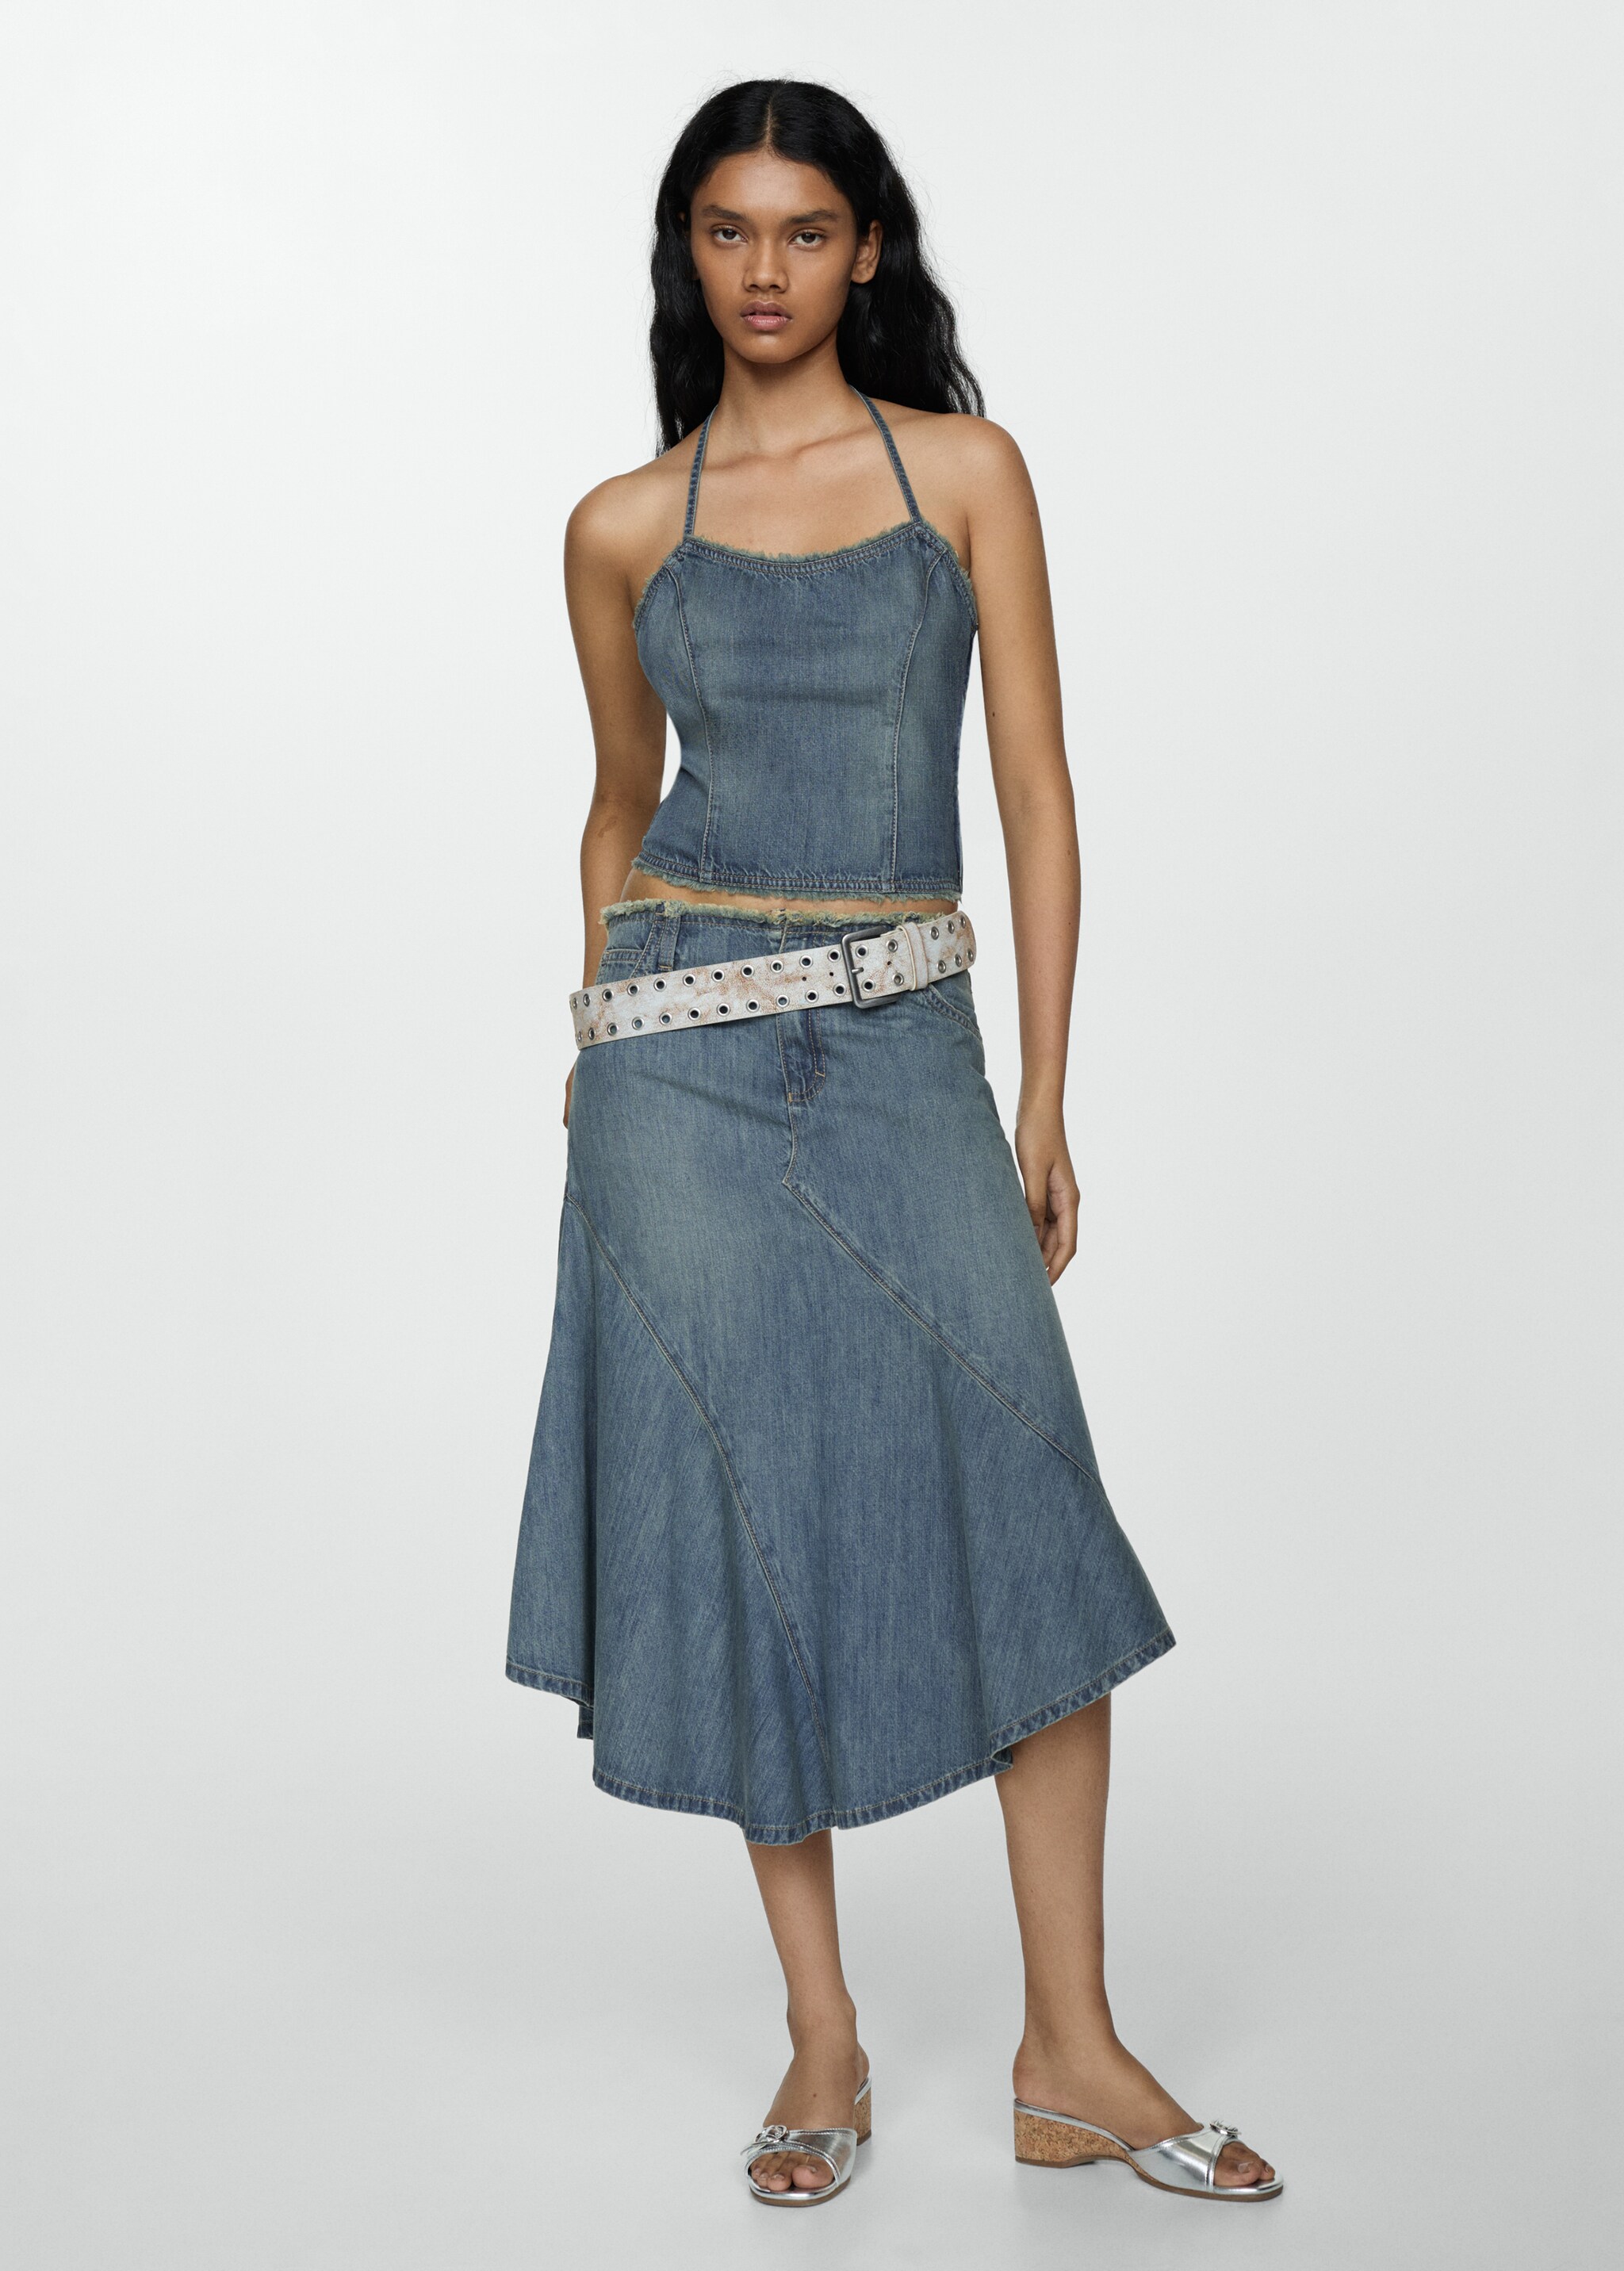 Denim top with frayed ends - General plane